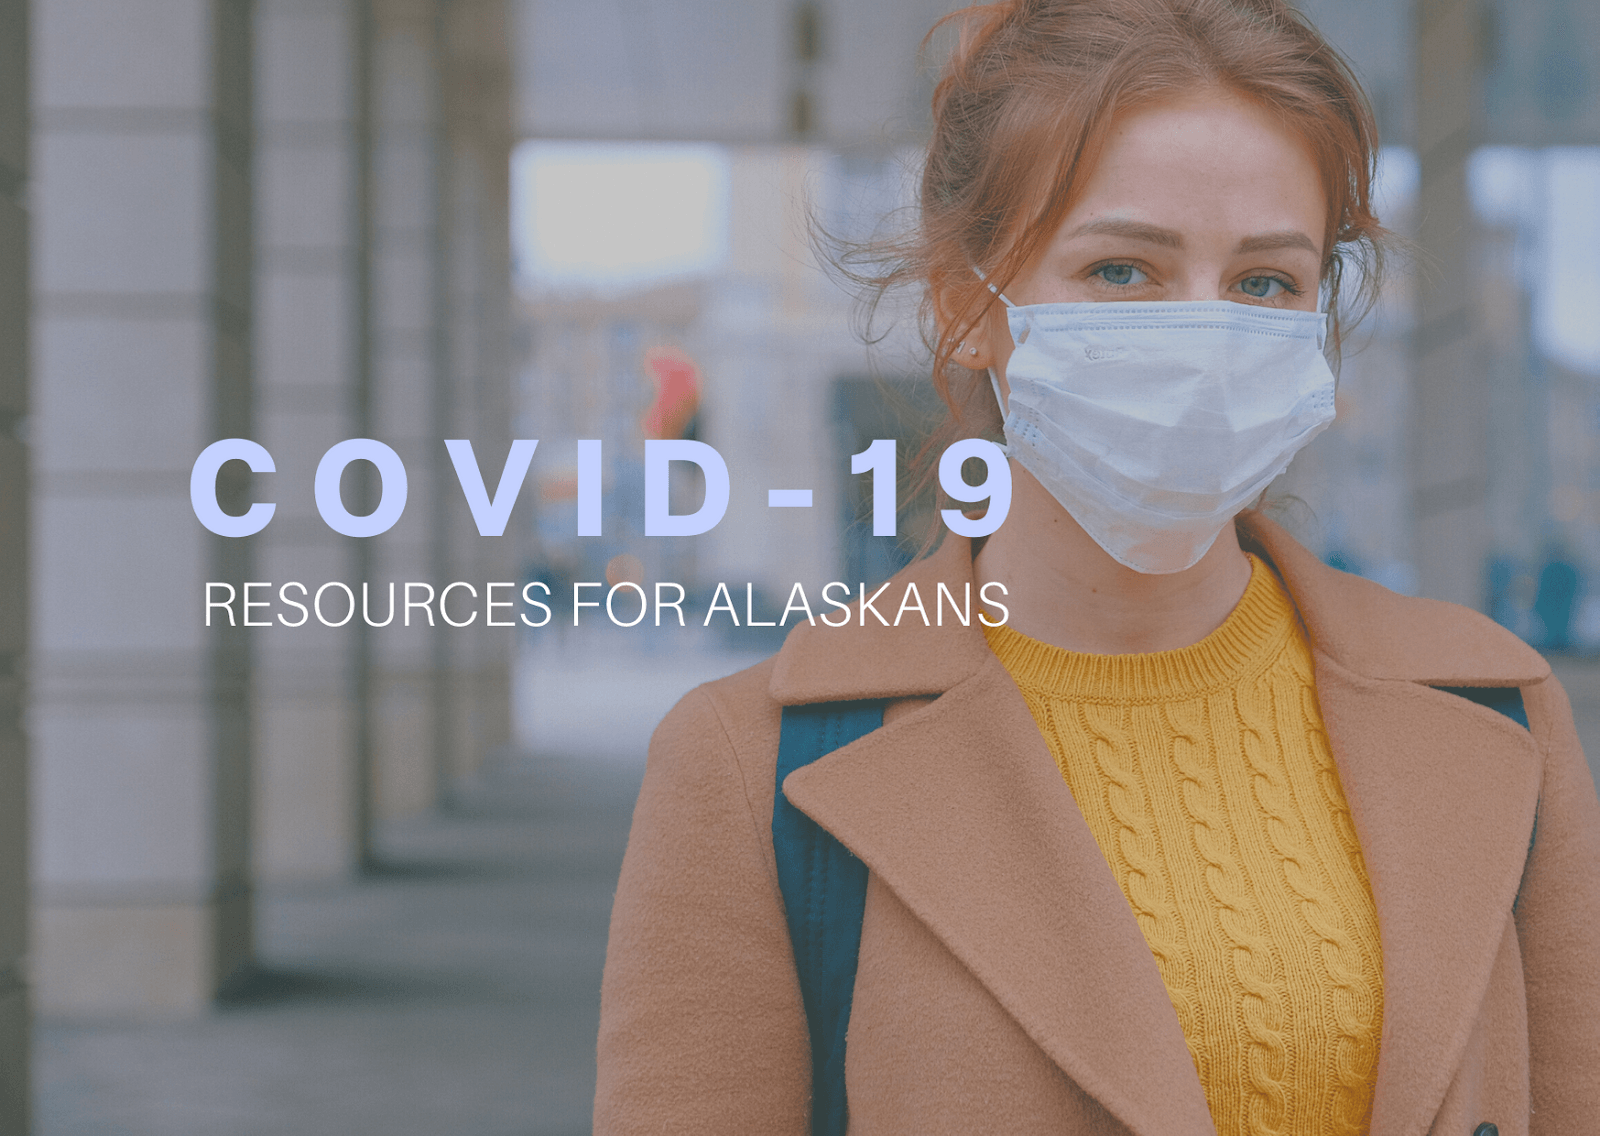 COVID-19 Resources for Alaskans